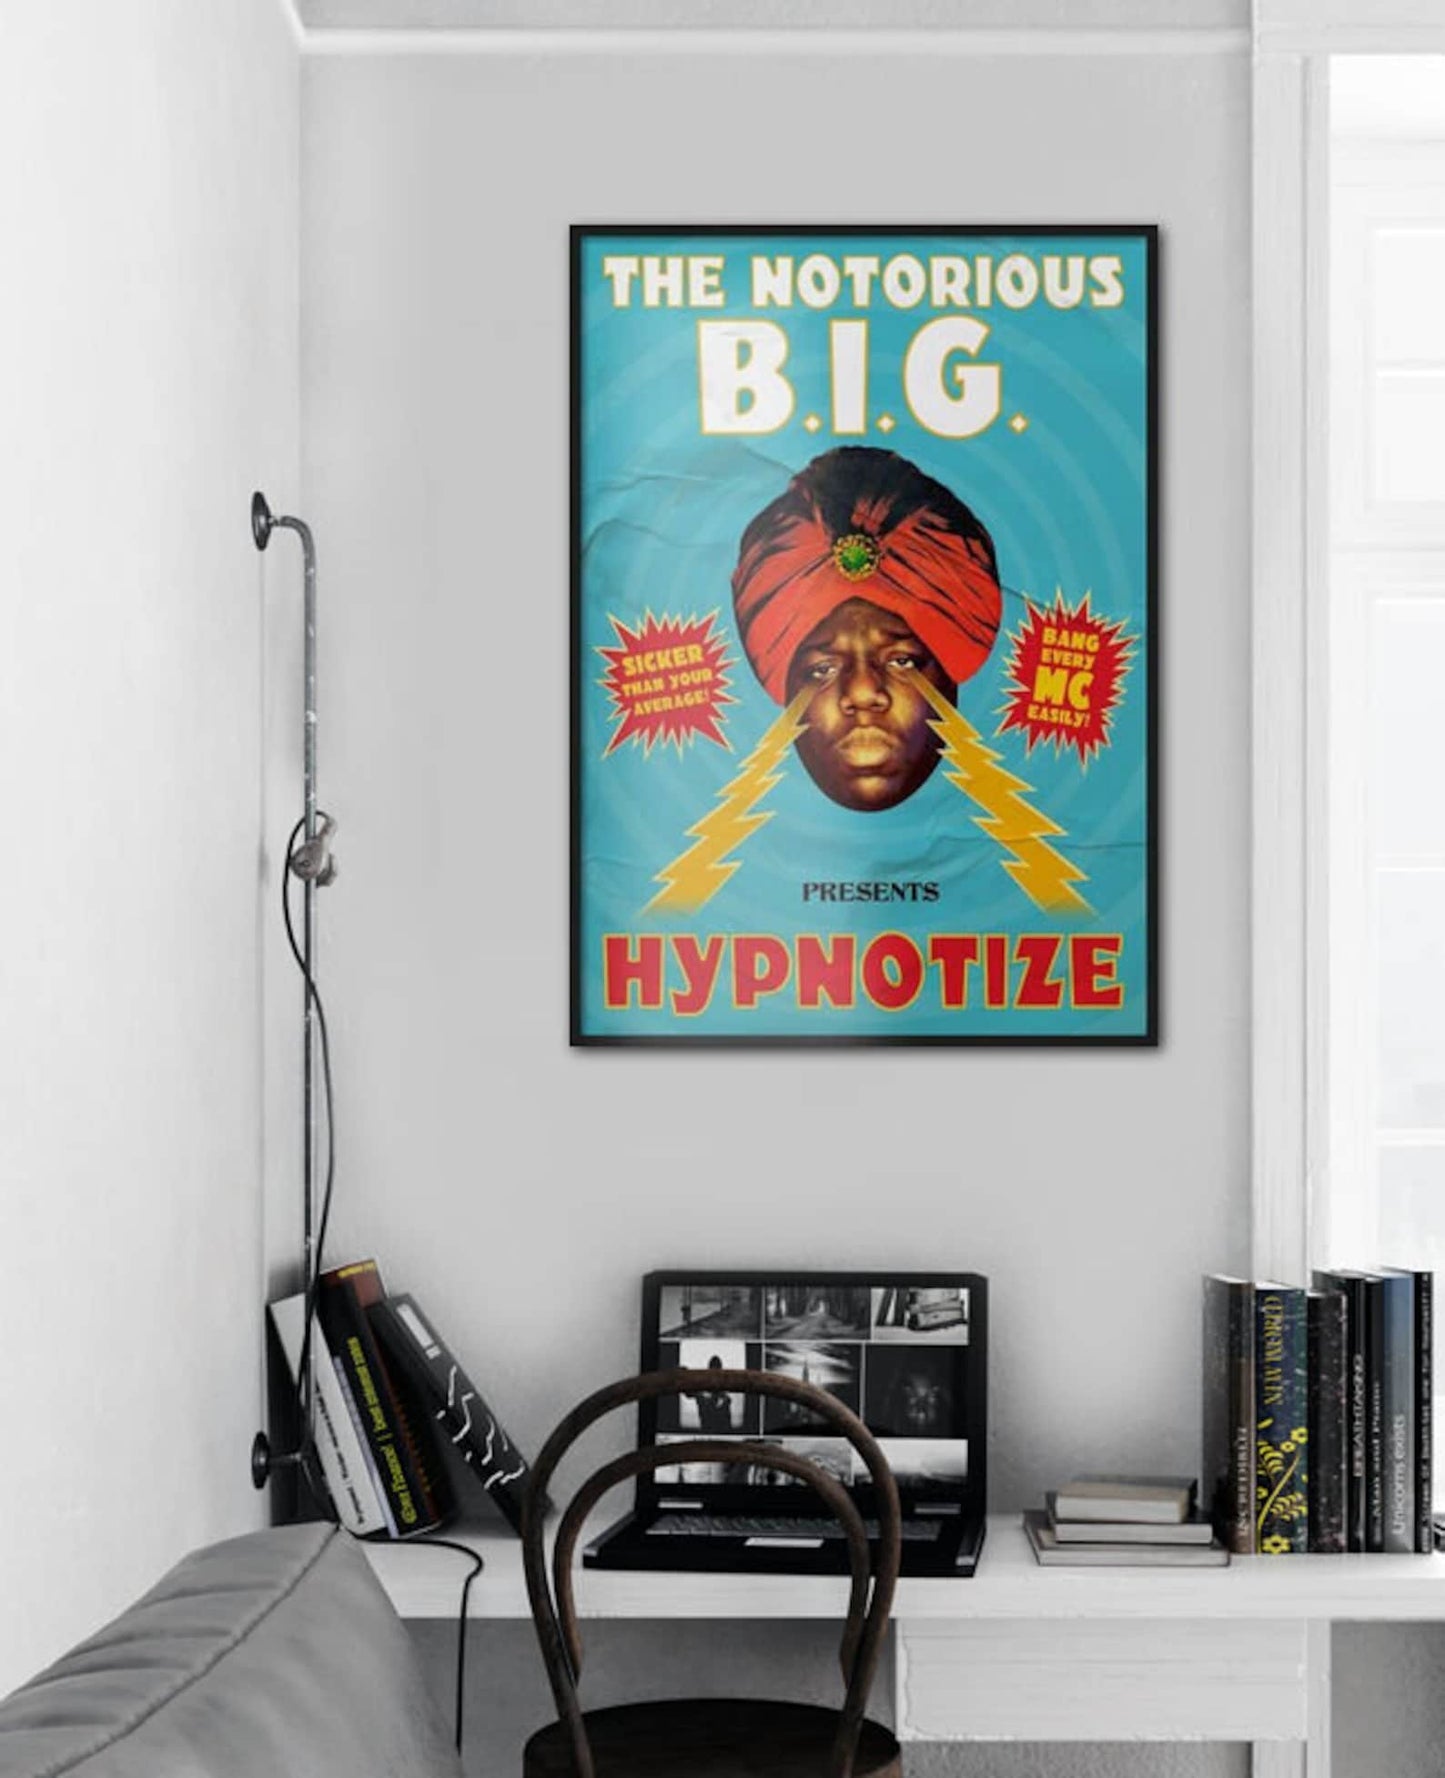 HYPNOTISE BIG INSPIRED GRAPHIC POSTER VINTAGE 90'S COMIC STYLE